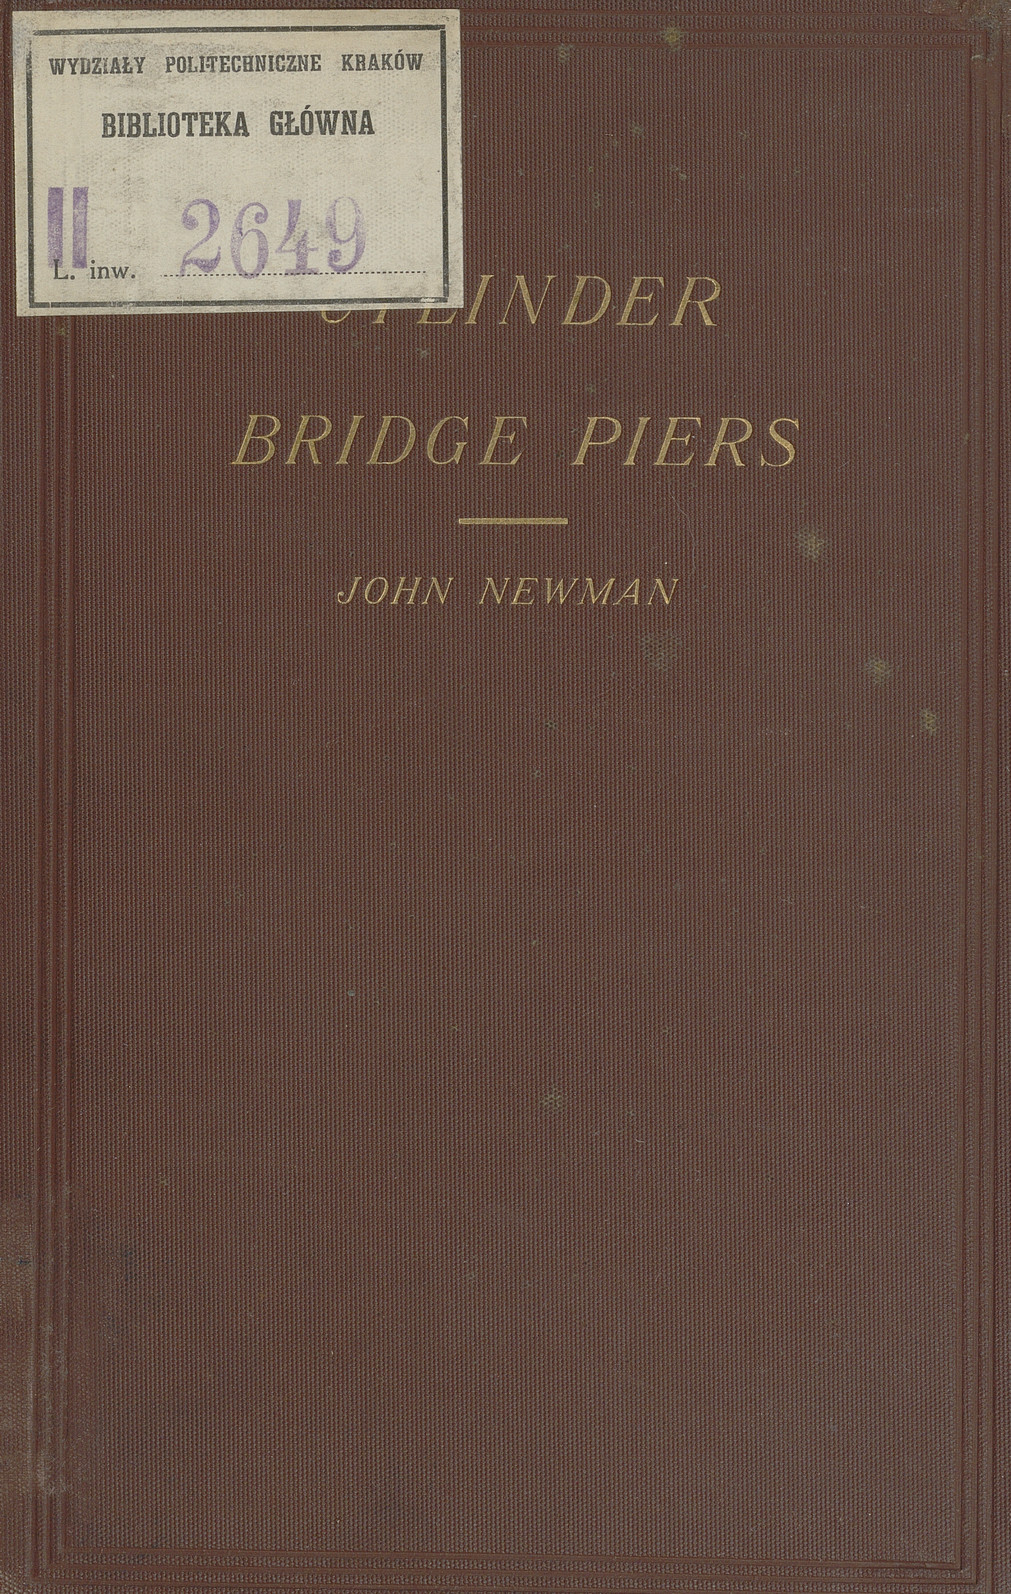 Notes on cylinder bridge piers and the well system of foundations : especially written to assist those engaged in the construction of bridges, quays, docks, river-walls, weirs, etc.